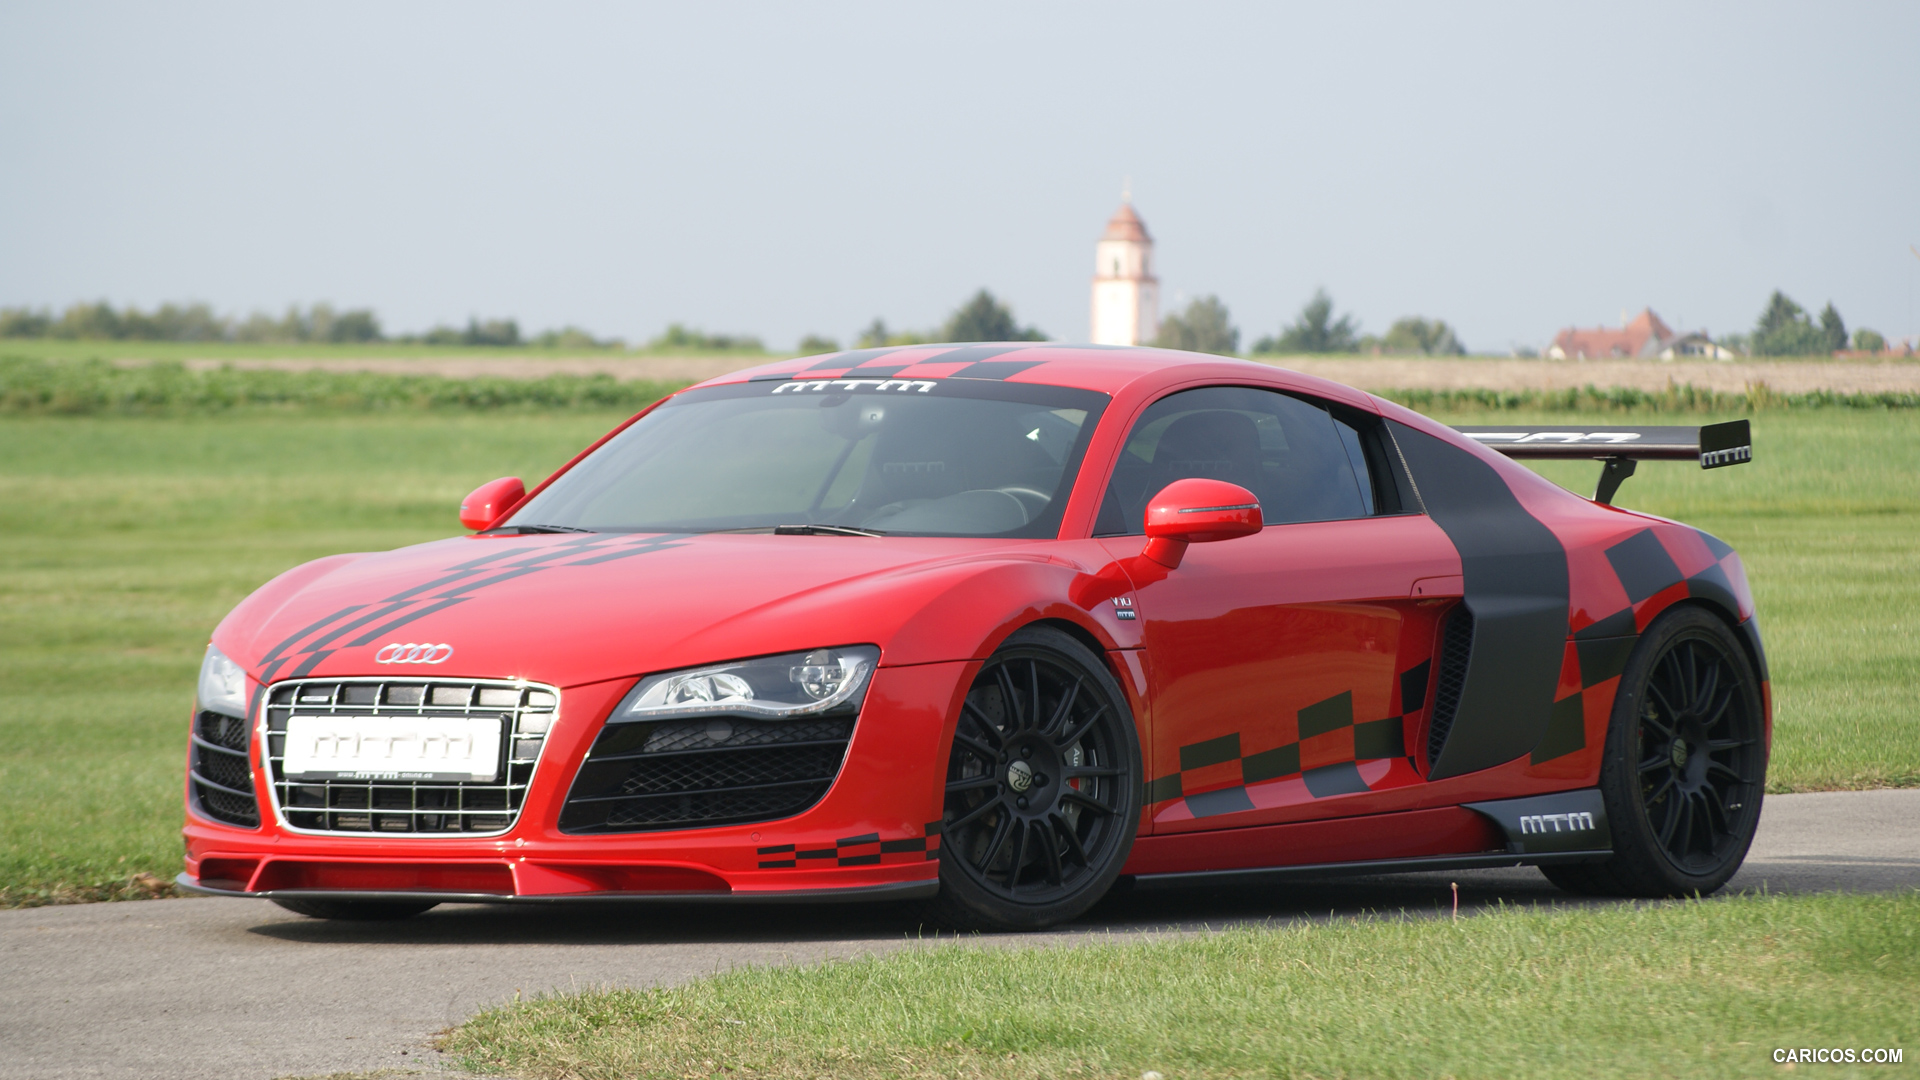 MTM Audi R8 V10 (2013) Coupe - Front, #13 of 21